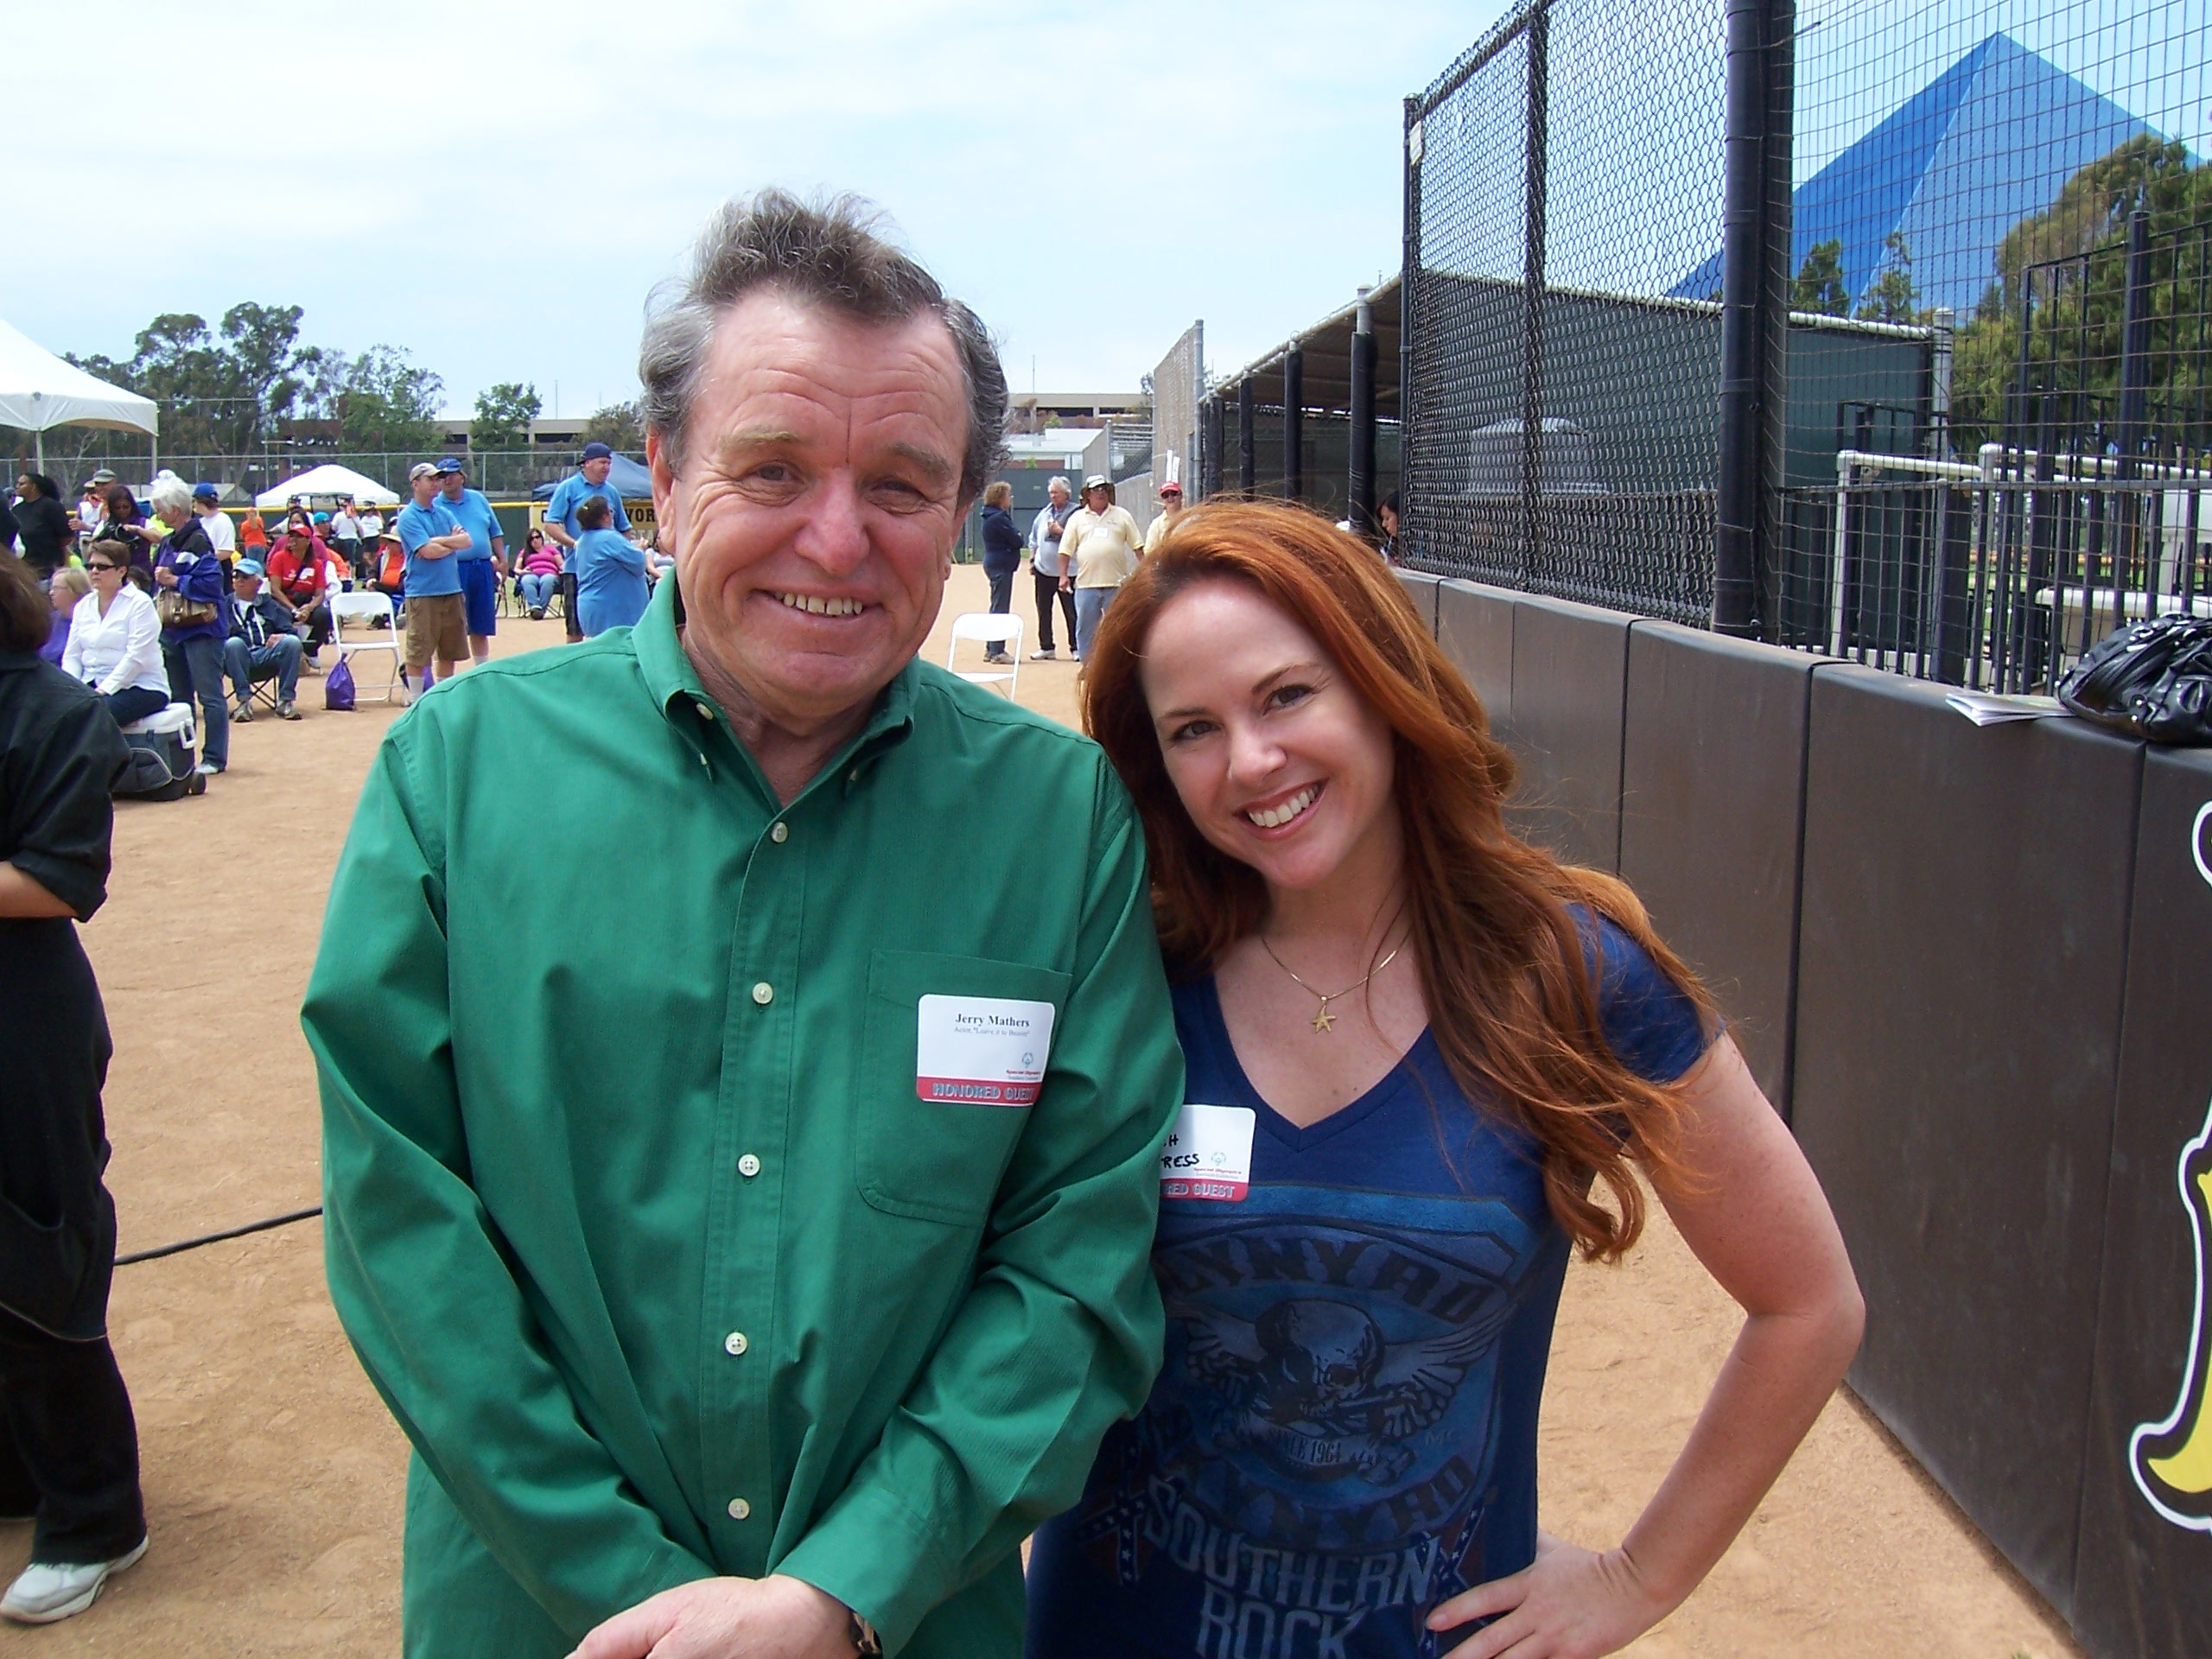 Special Olympics Event with Jerry Mathers